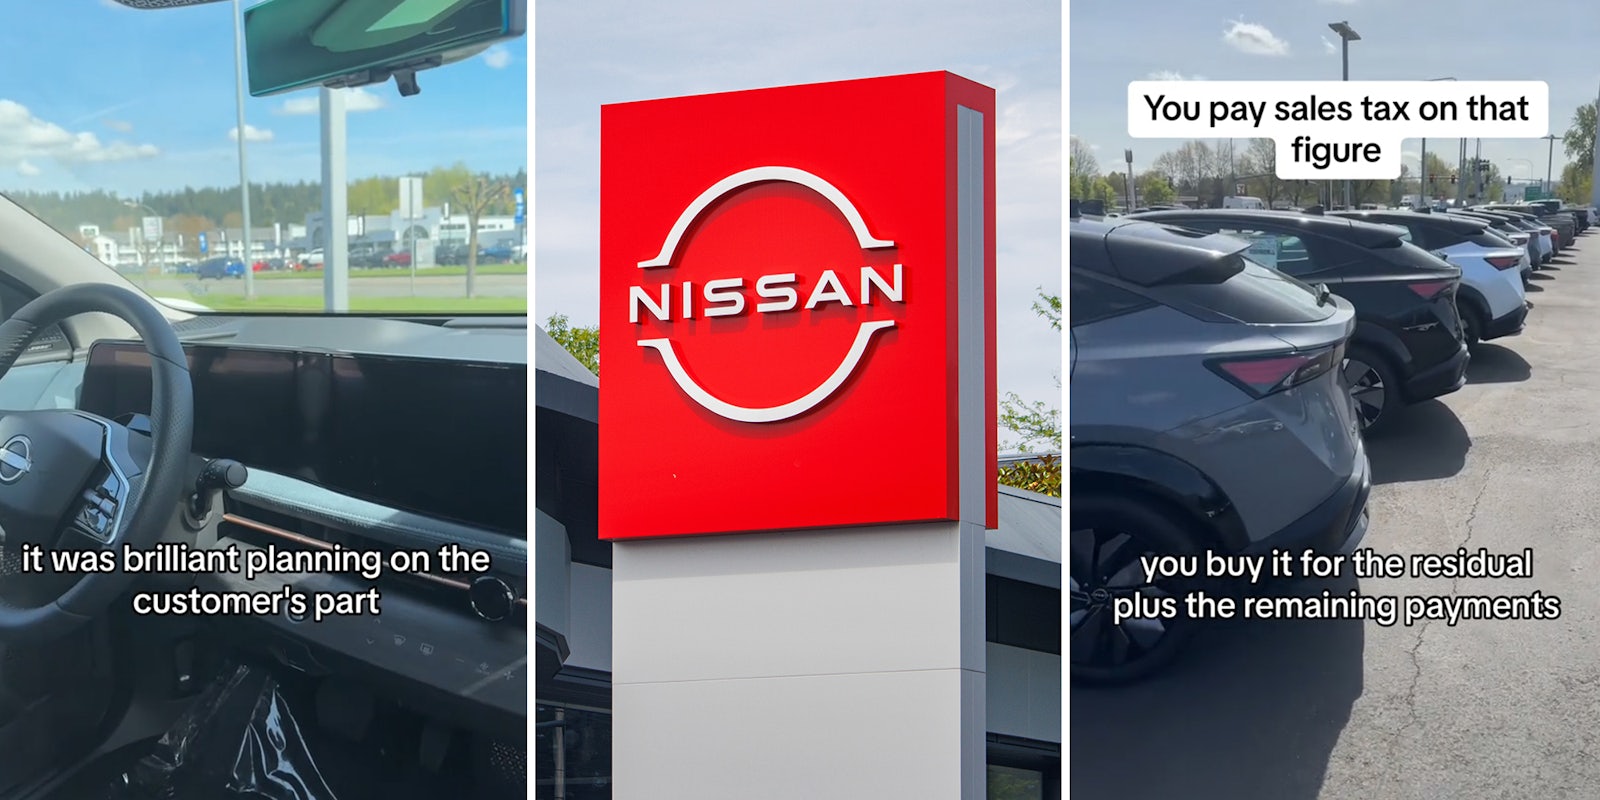 Car salesman says customer ‘outsmarted’ dealership, Nissan with this tactic